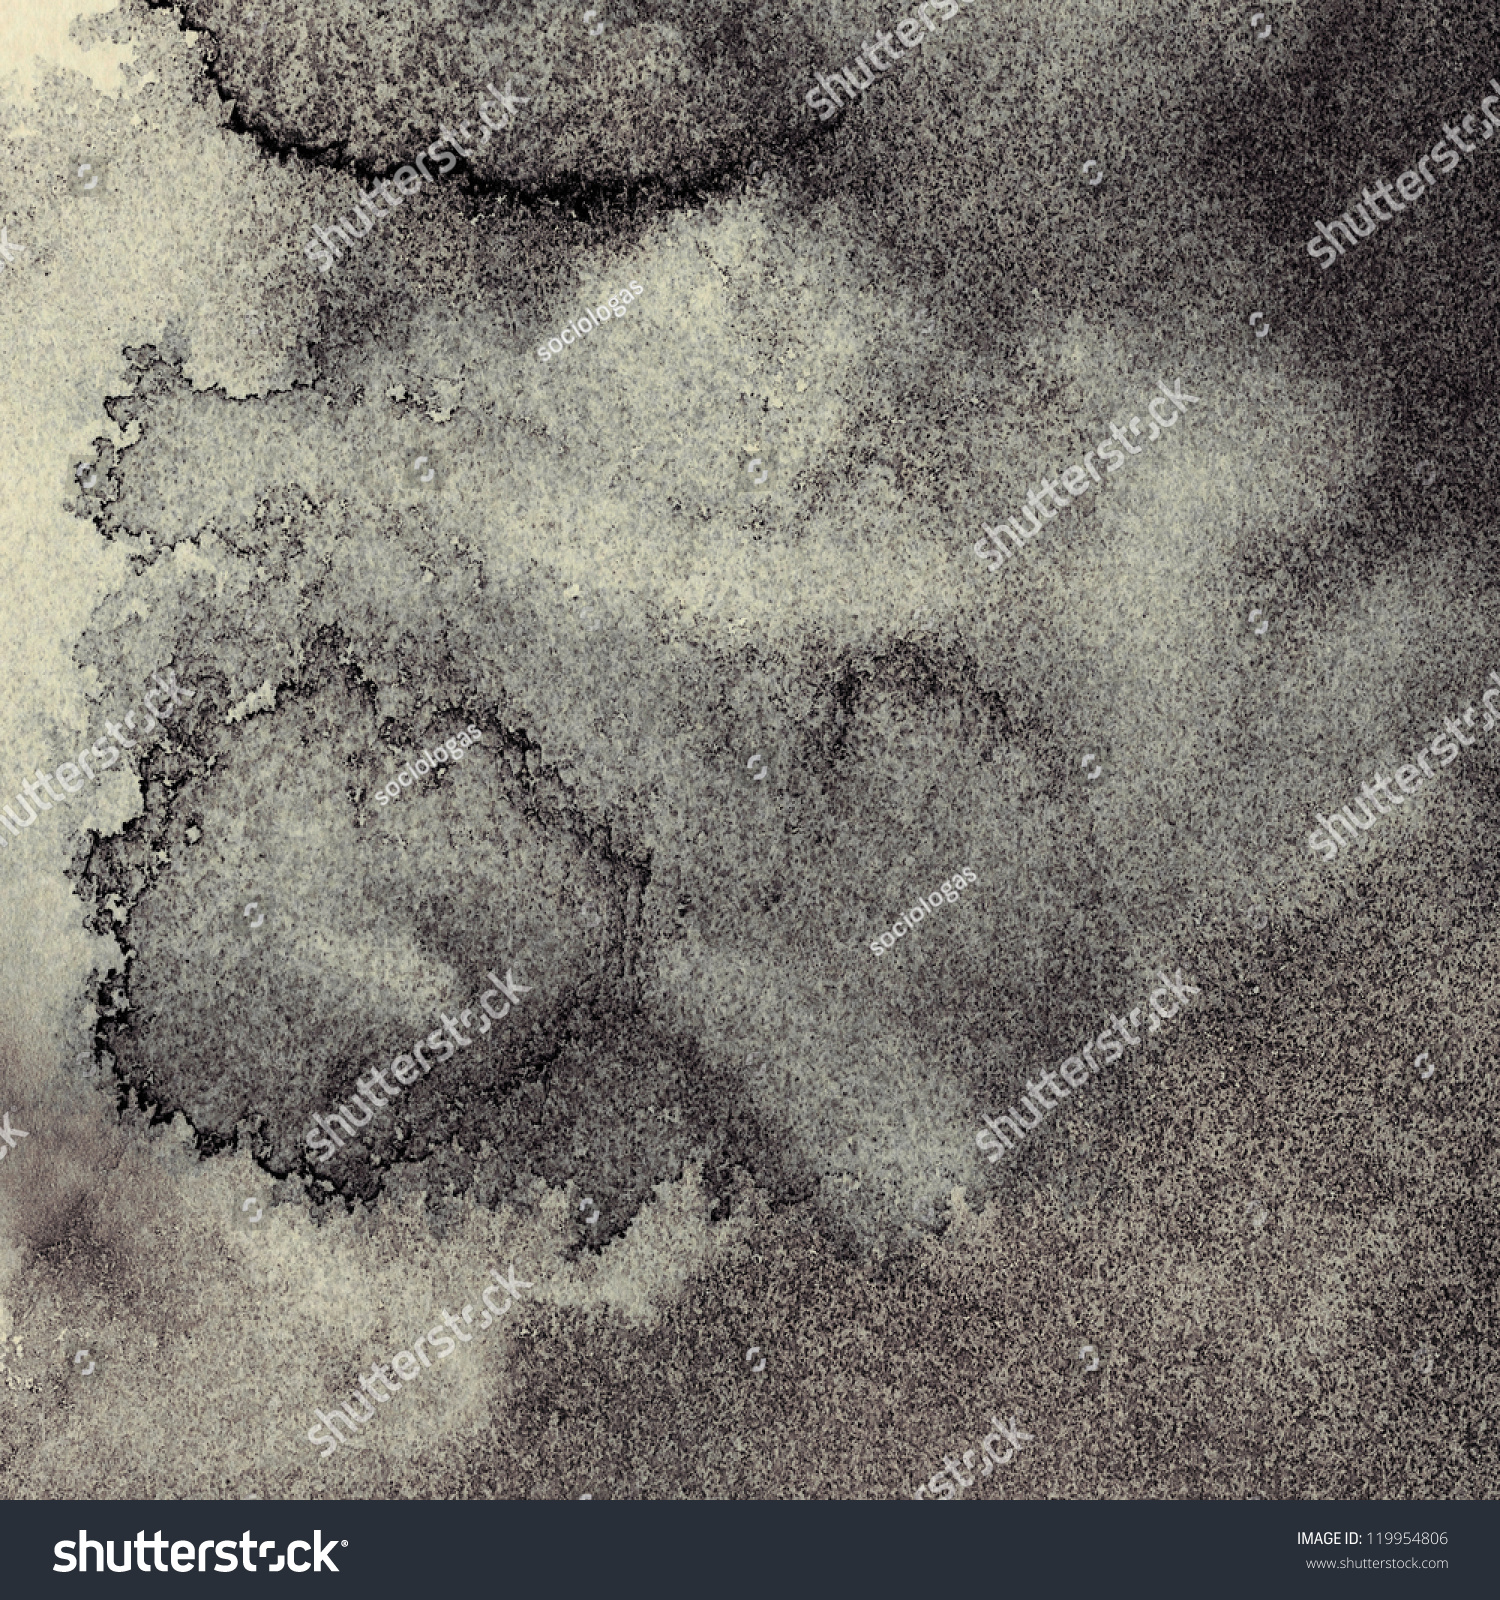 Abstract Painted Grunge Background Ink Texture Stock Illustration ...